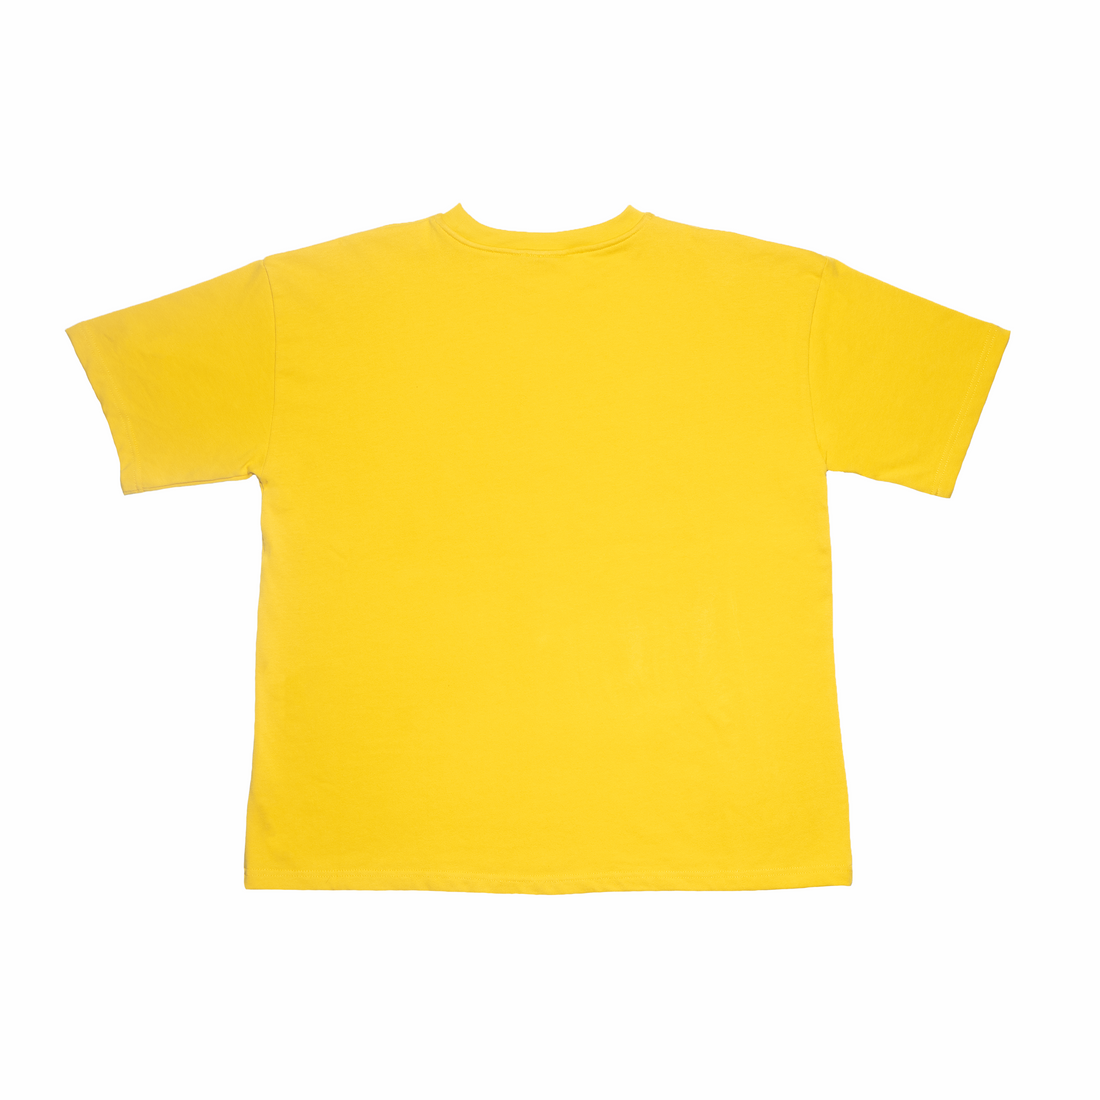 ASG YELLOW STAMPS TEE